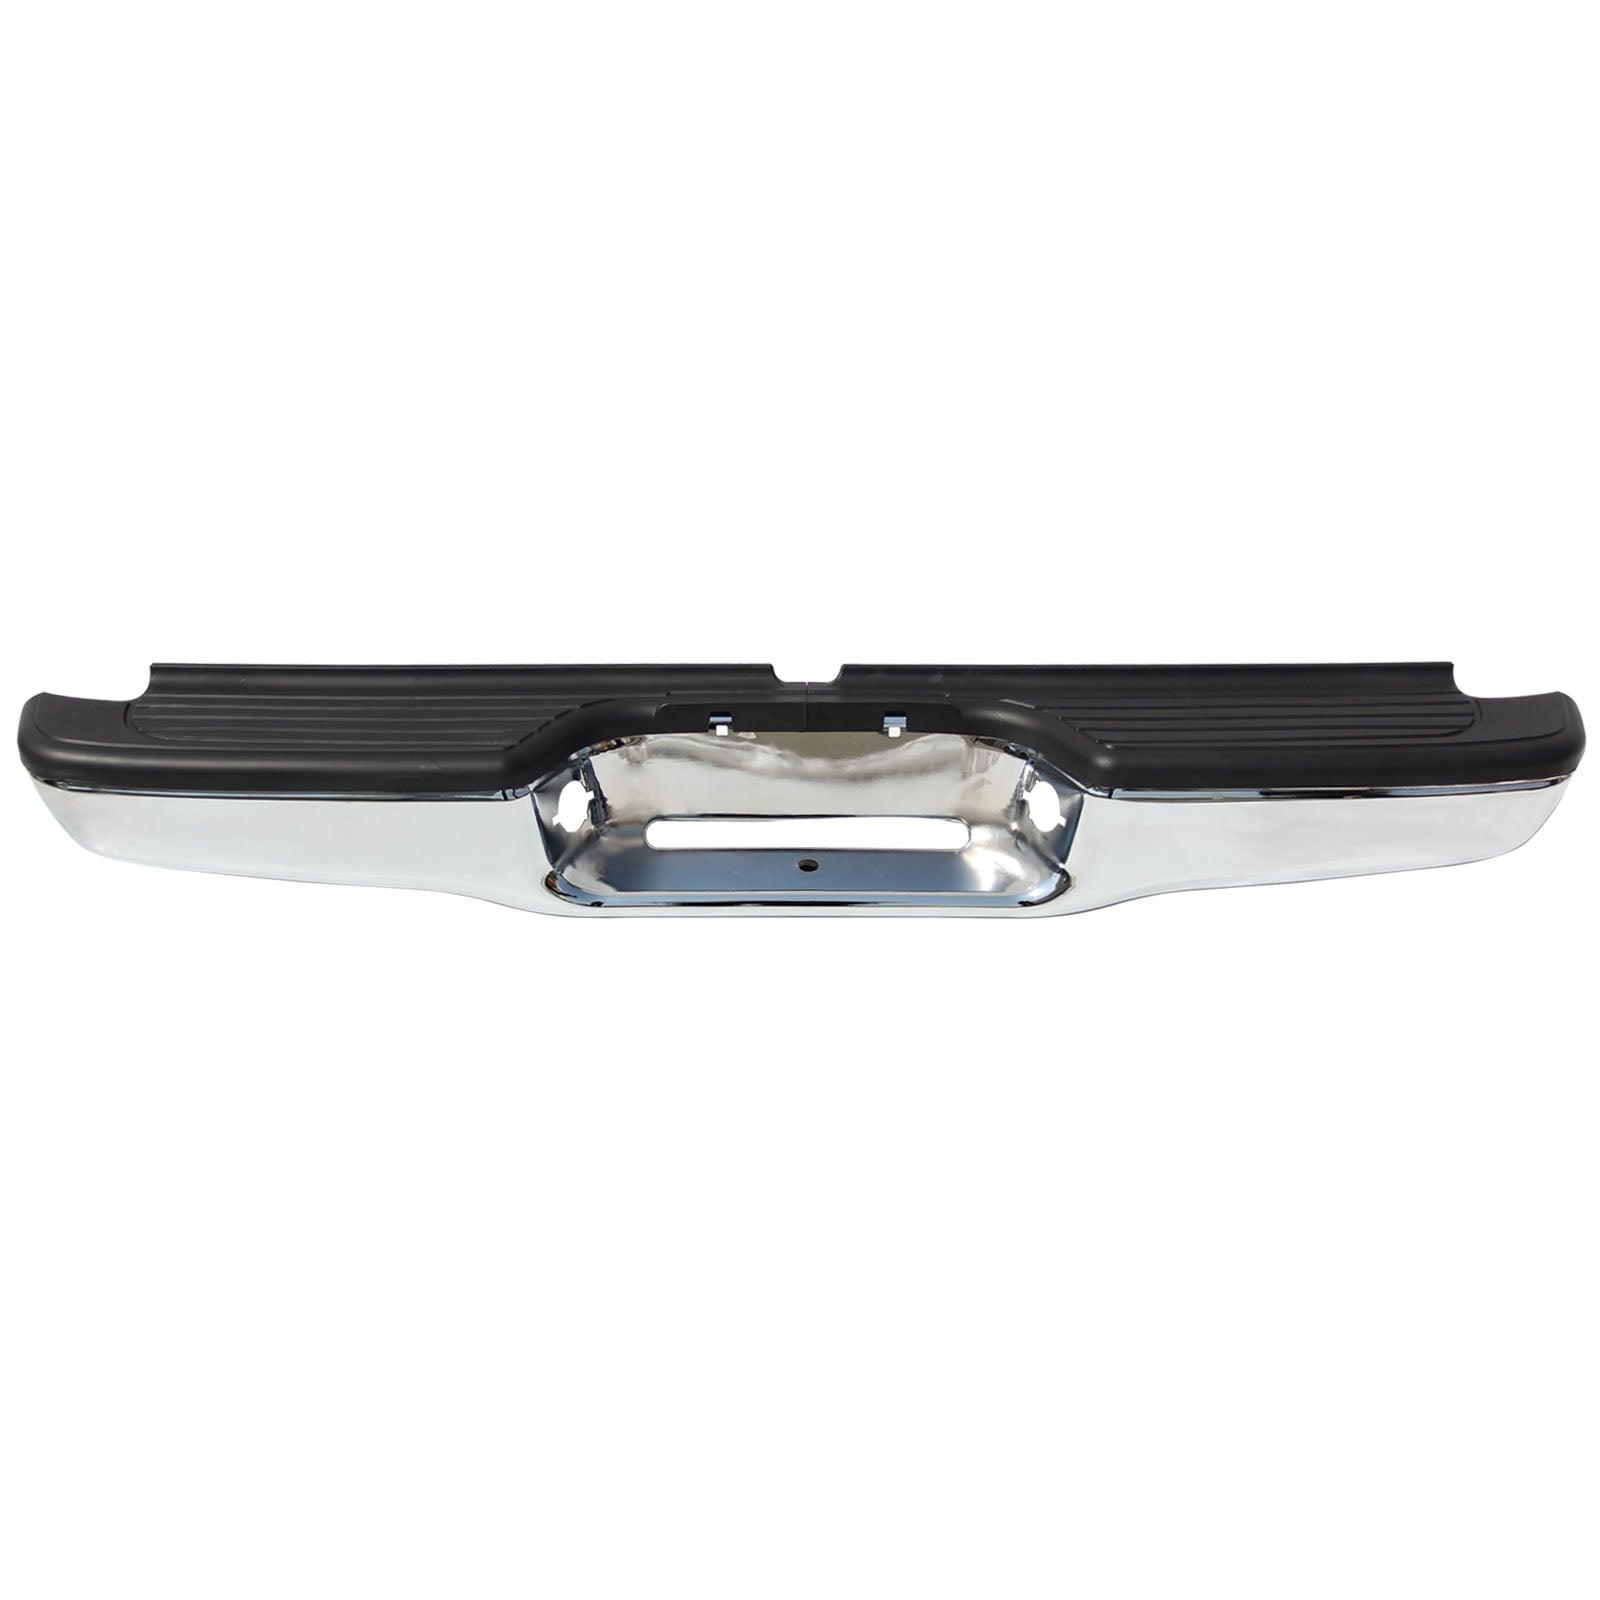 NEW Chrome - Complete Rear Steel Bumper Assembly For 1995 1996 1997 1998 1999 2000 2001 2002 2003 2004 Toyota Tacoma - Goodmatchup